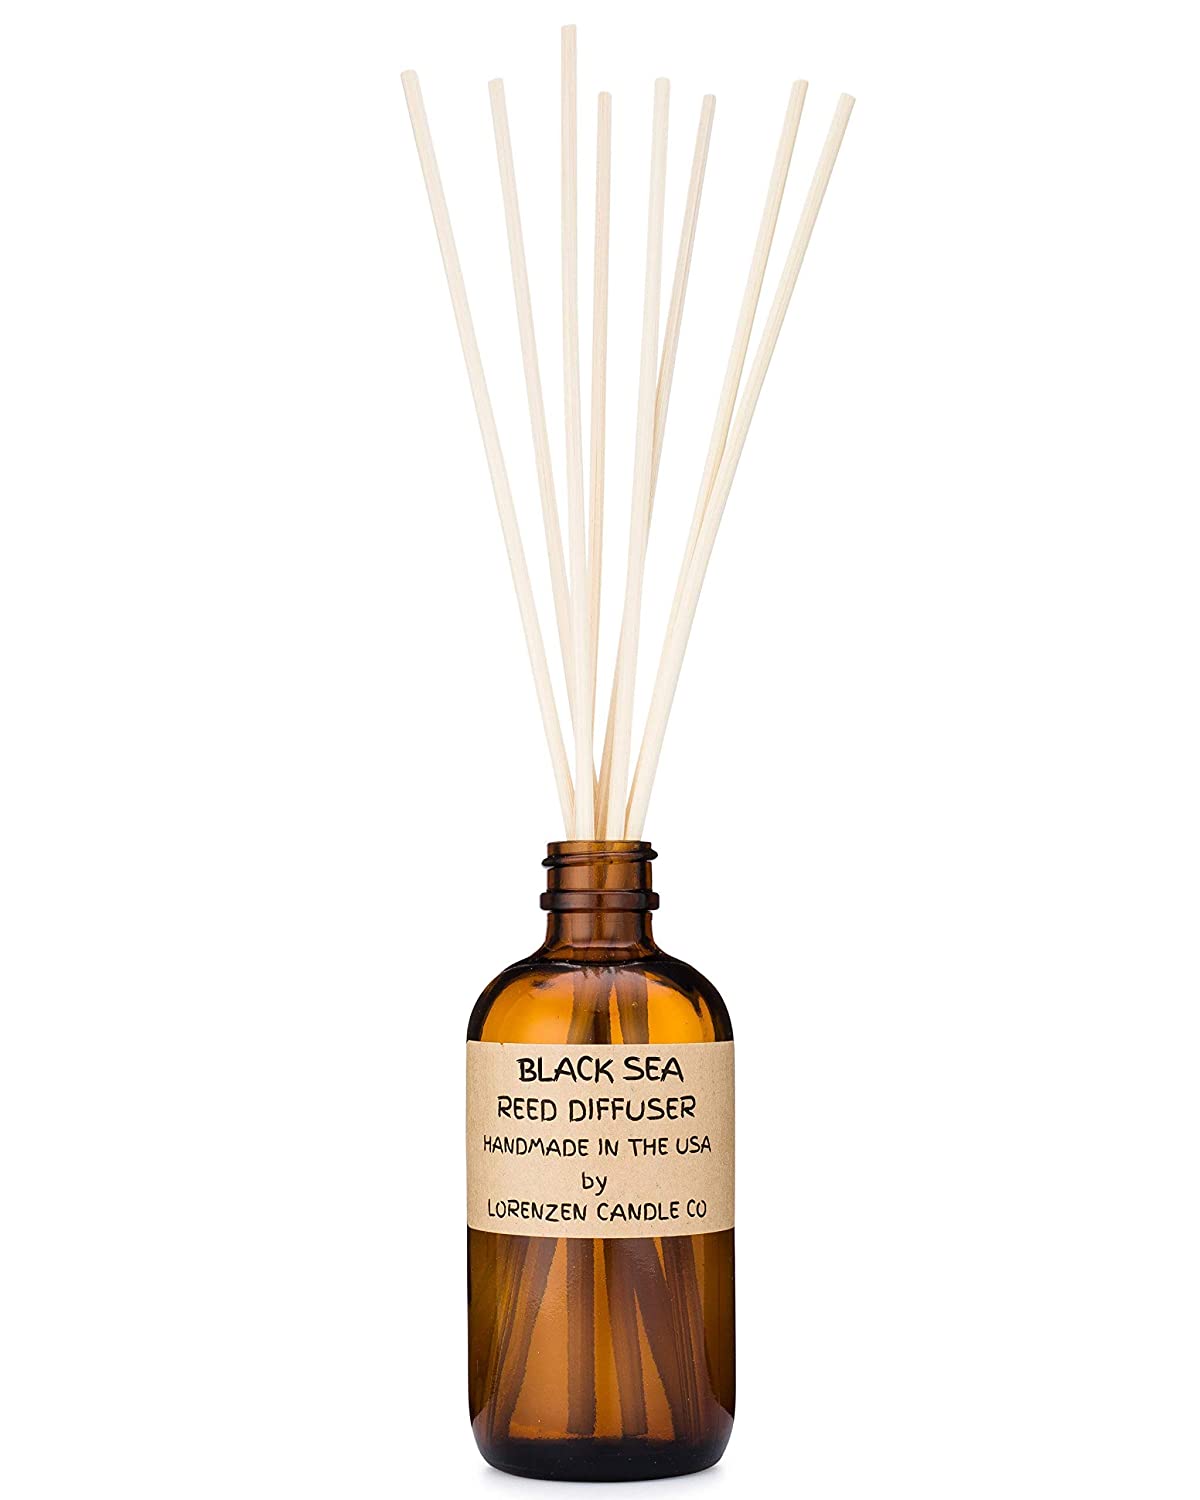 Black Sea Reed Diffuser Set 3oz | Handmade by Lorenzen Candle Co